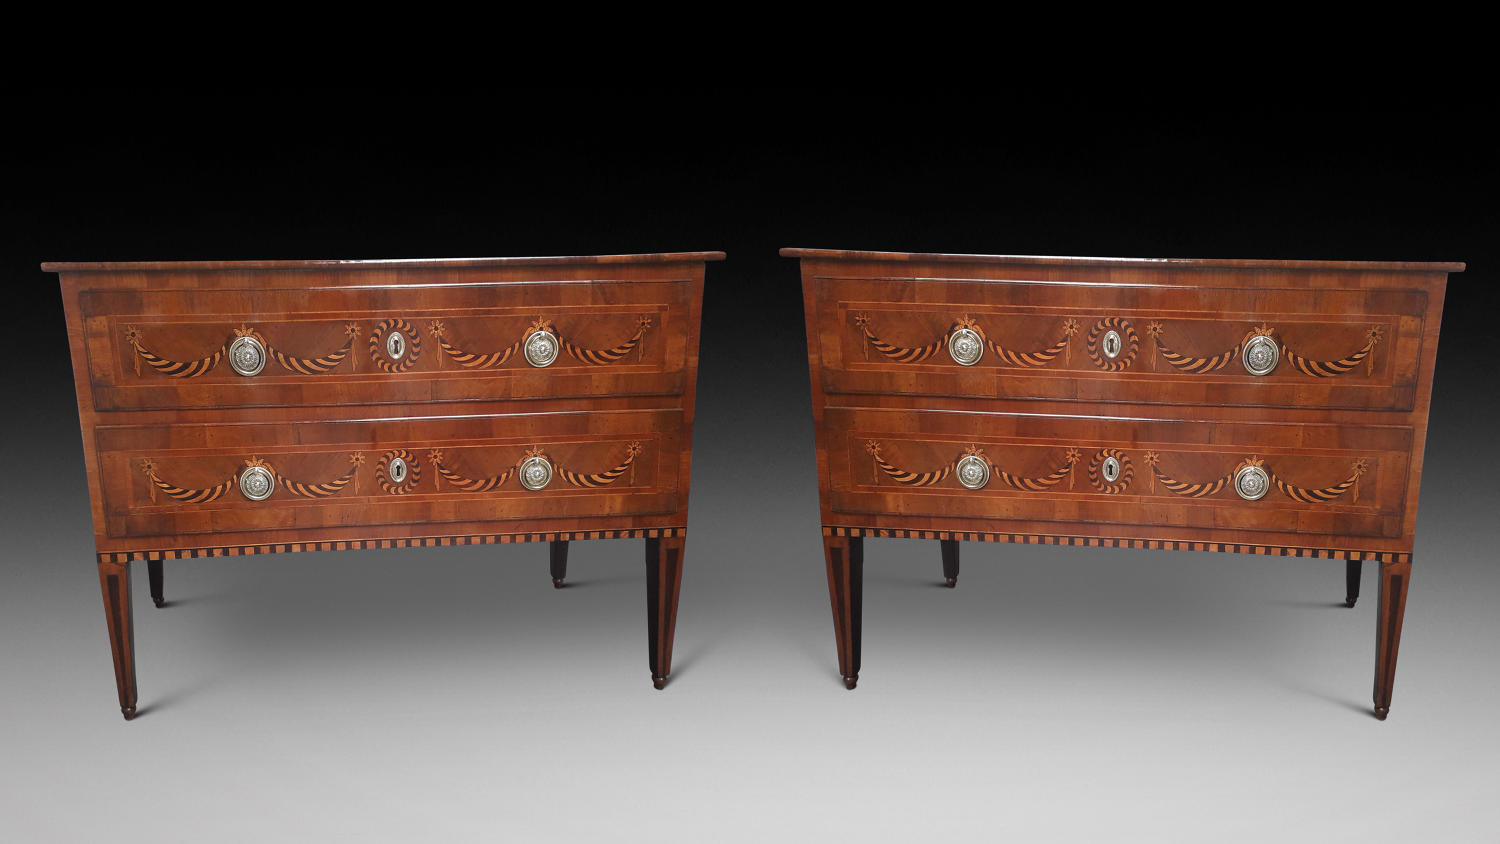 A PAIR OF 18TH CENTURY ITALIAN COMMODES